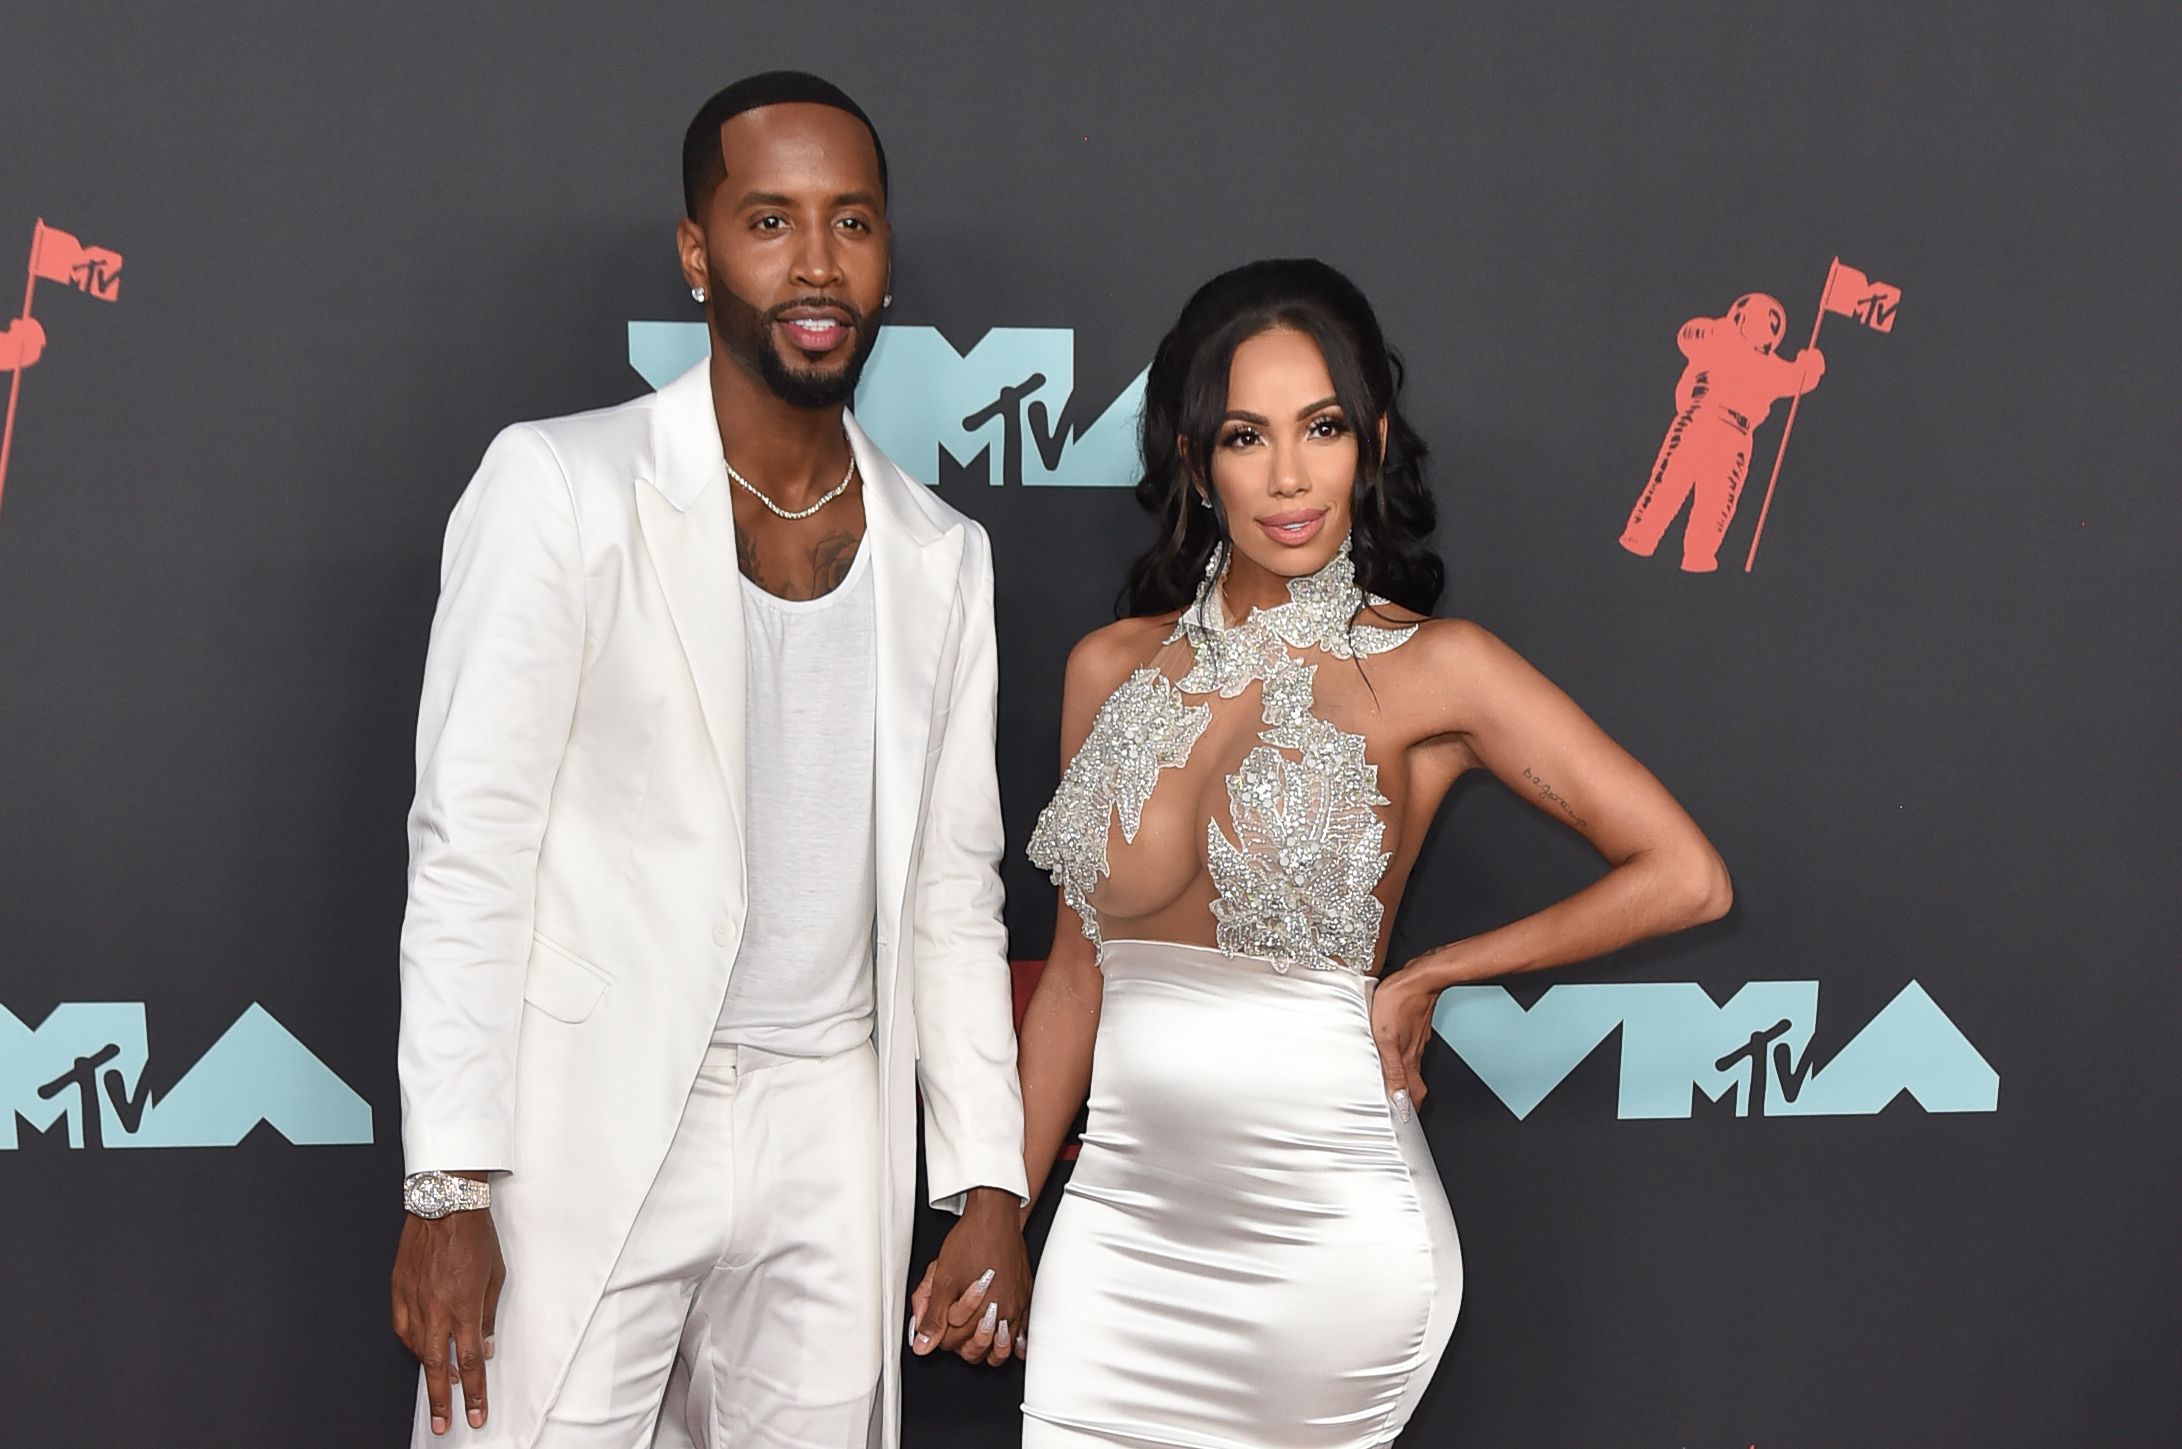 Safaree Samuels and Erica Mena at the 2019 VMA awards at Prudential Center on August 26, 2019 in Newark, New Jersey| Photo: Getty Images